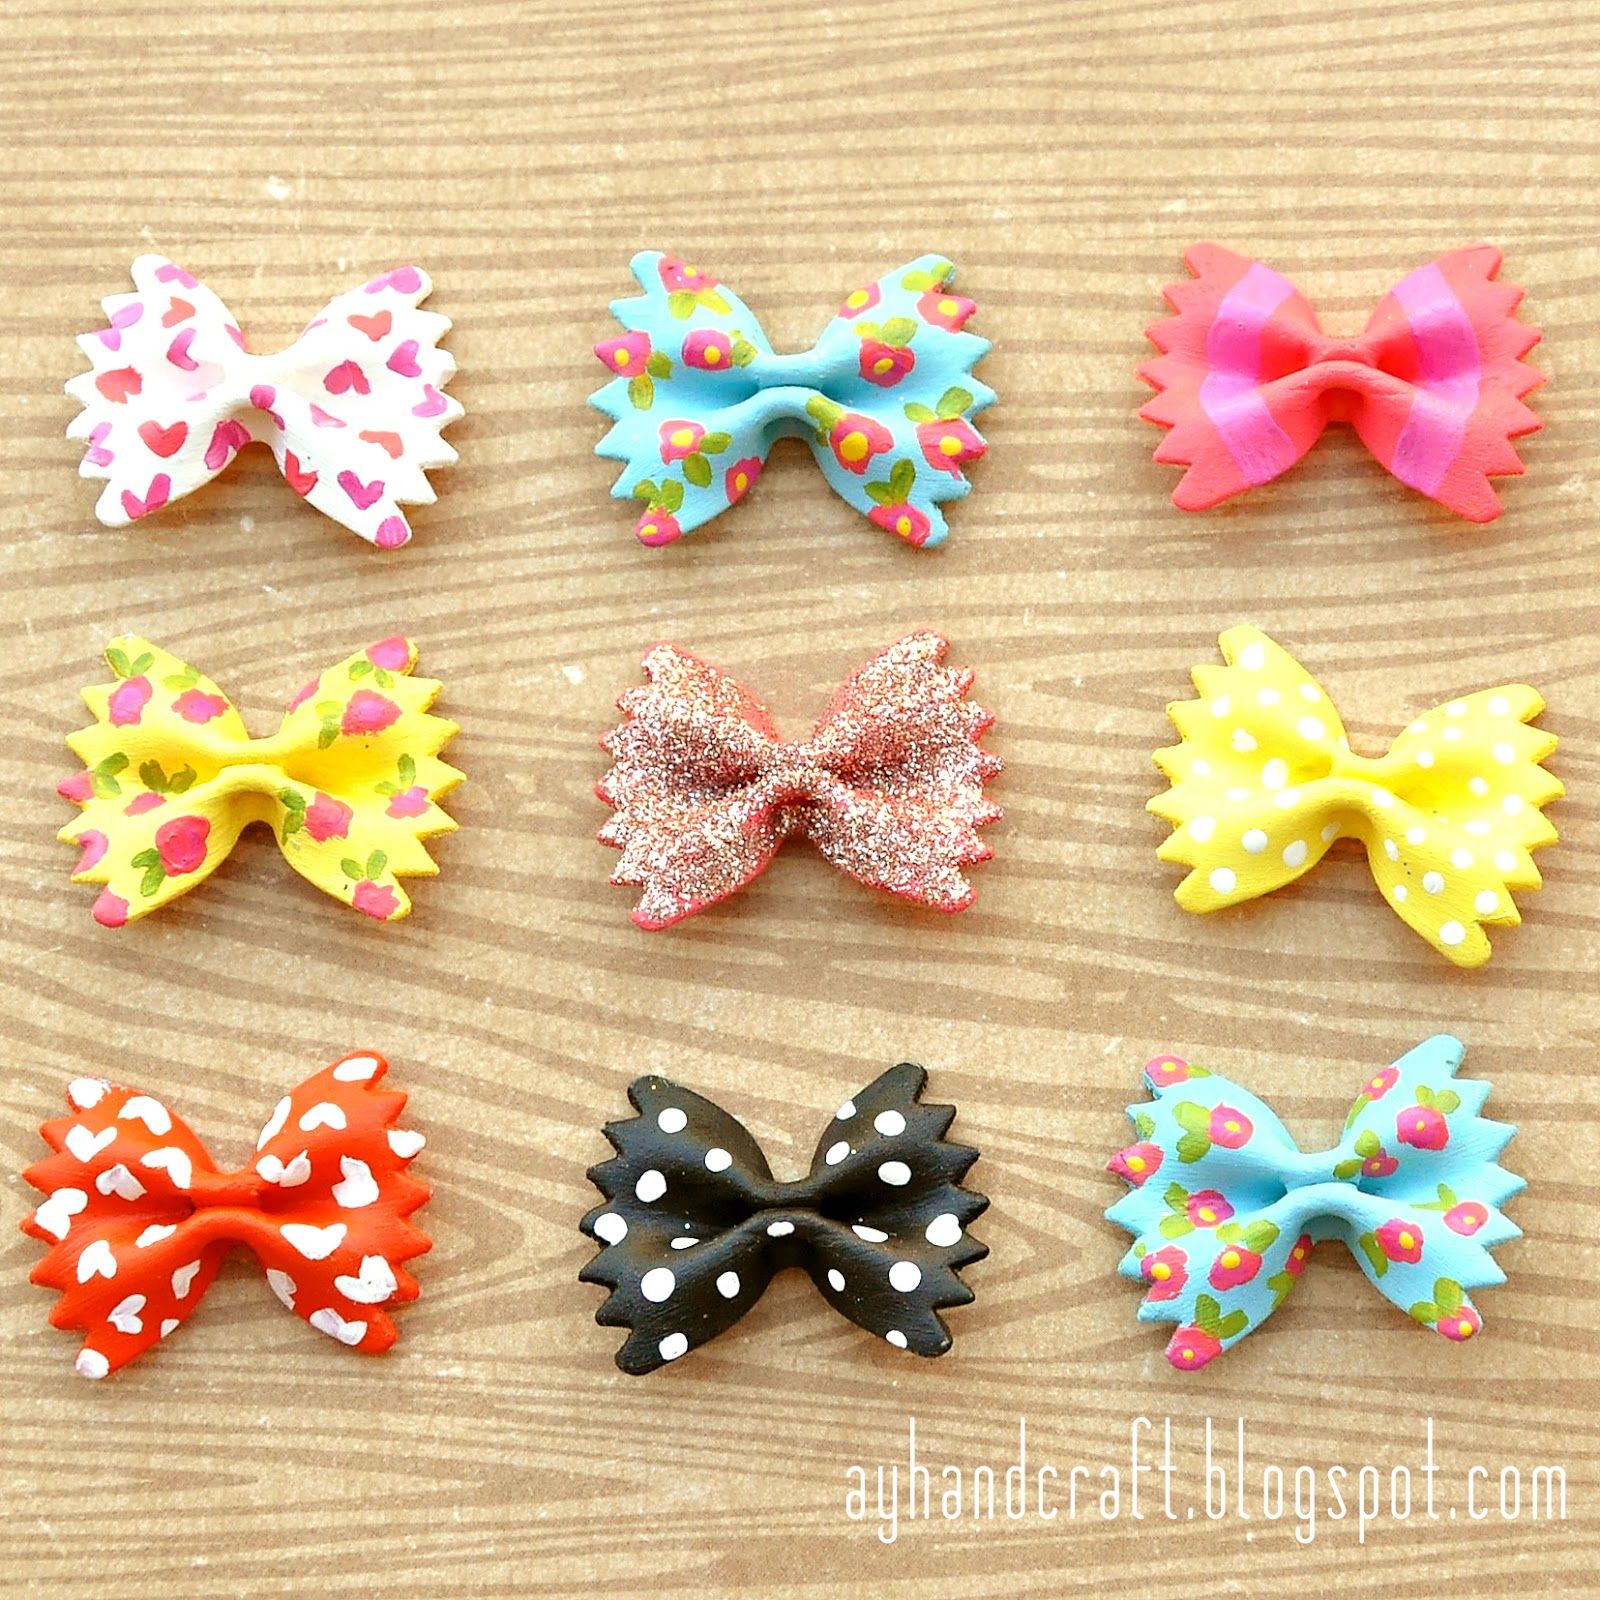 A DIY for painted pasta (these would be a fun way to jazz up plain hair clips!)